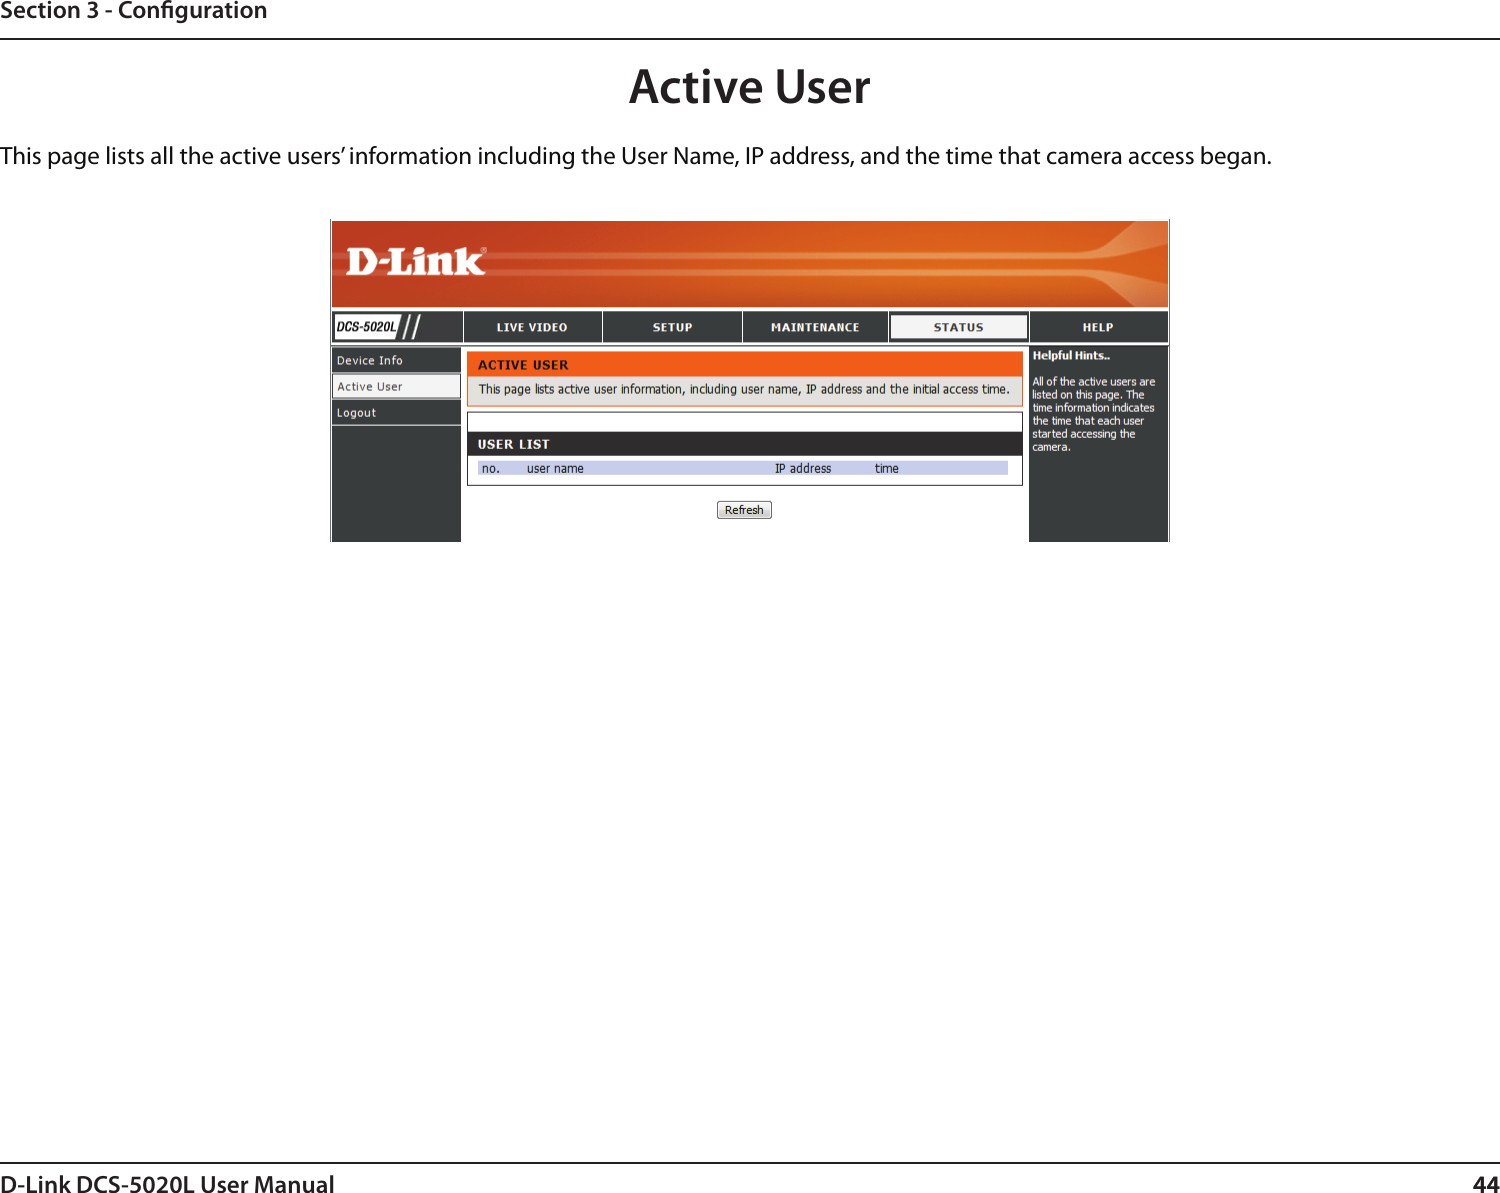 44D-Link DCS-5020L User Manual 44Section 3 - CongurationActive UserThis page lists all the active users’ information including the User Name, IP address, and the time that camera access began.